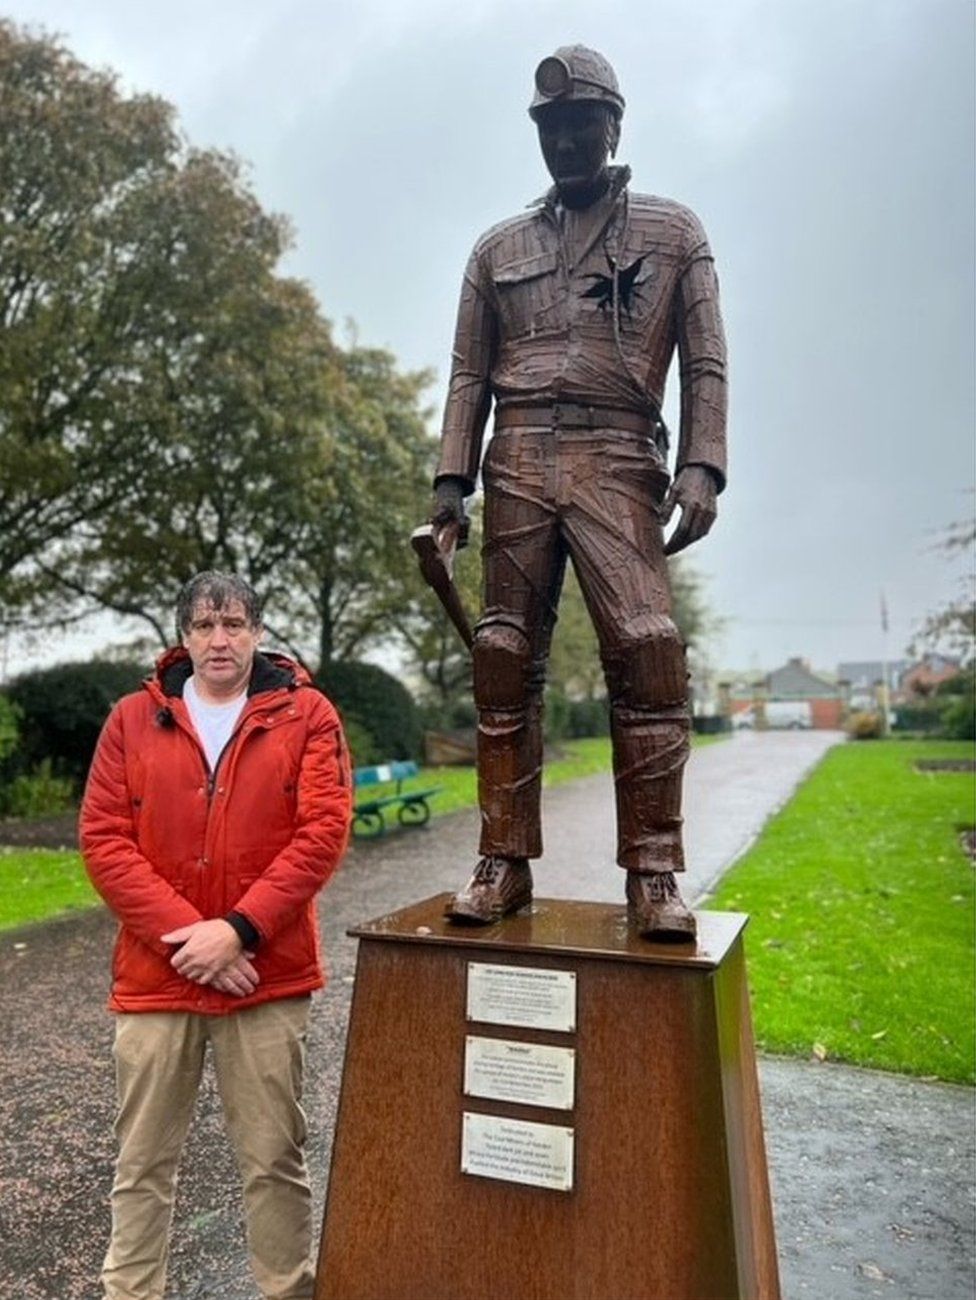 Pip Fallow alongside a statue of a coal miner with his heart ripped out, symbolising the loss of heavy industry in the area